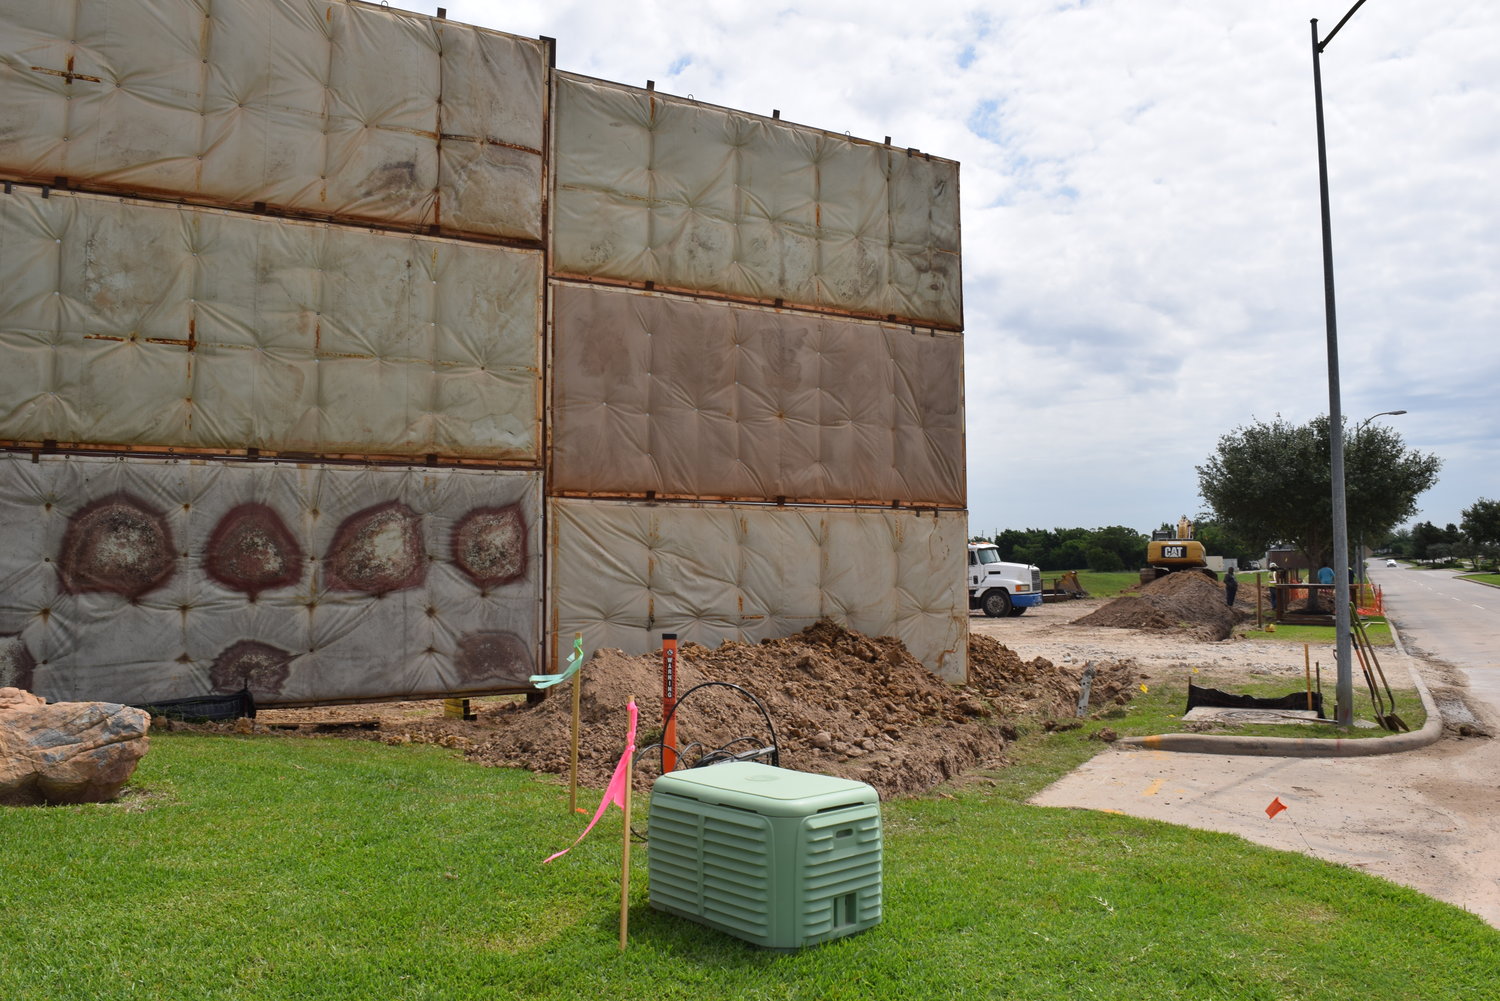 Drilling of a new well for the city of Katy’s Water Plant No. 7 is causing noise disruptions for nearby residents despite the noise-buffering wall shown here being erected between the site and the nearby homes. This has caused problems for nearby homeowners working from home during the pandemic over the last year.